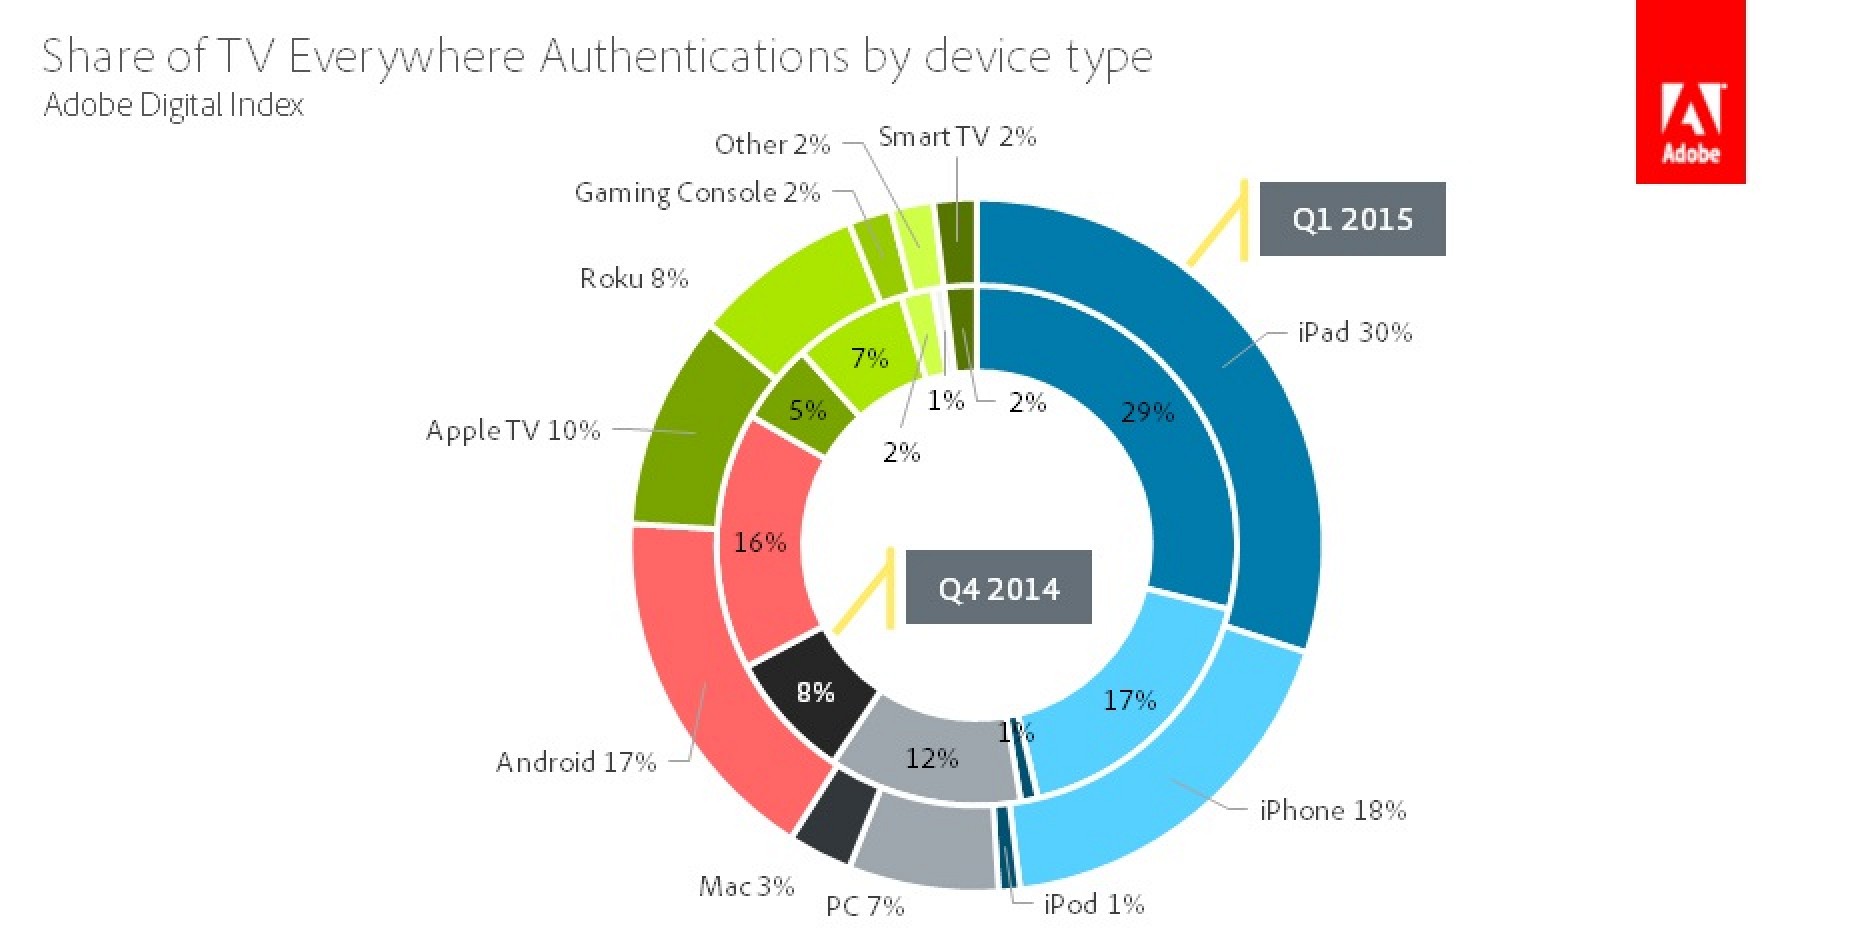 Apple Dominates Authenticated 'TV Everywhere' Streaming With 62% Market